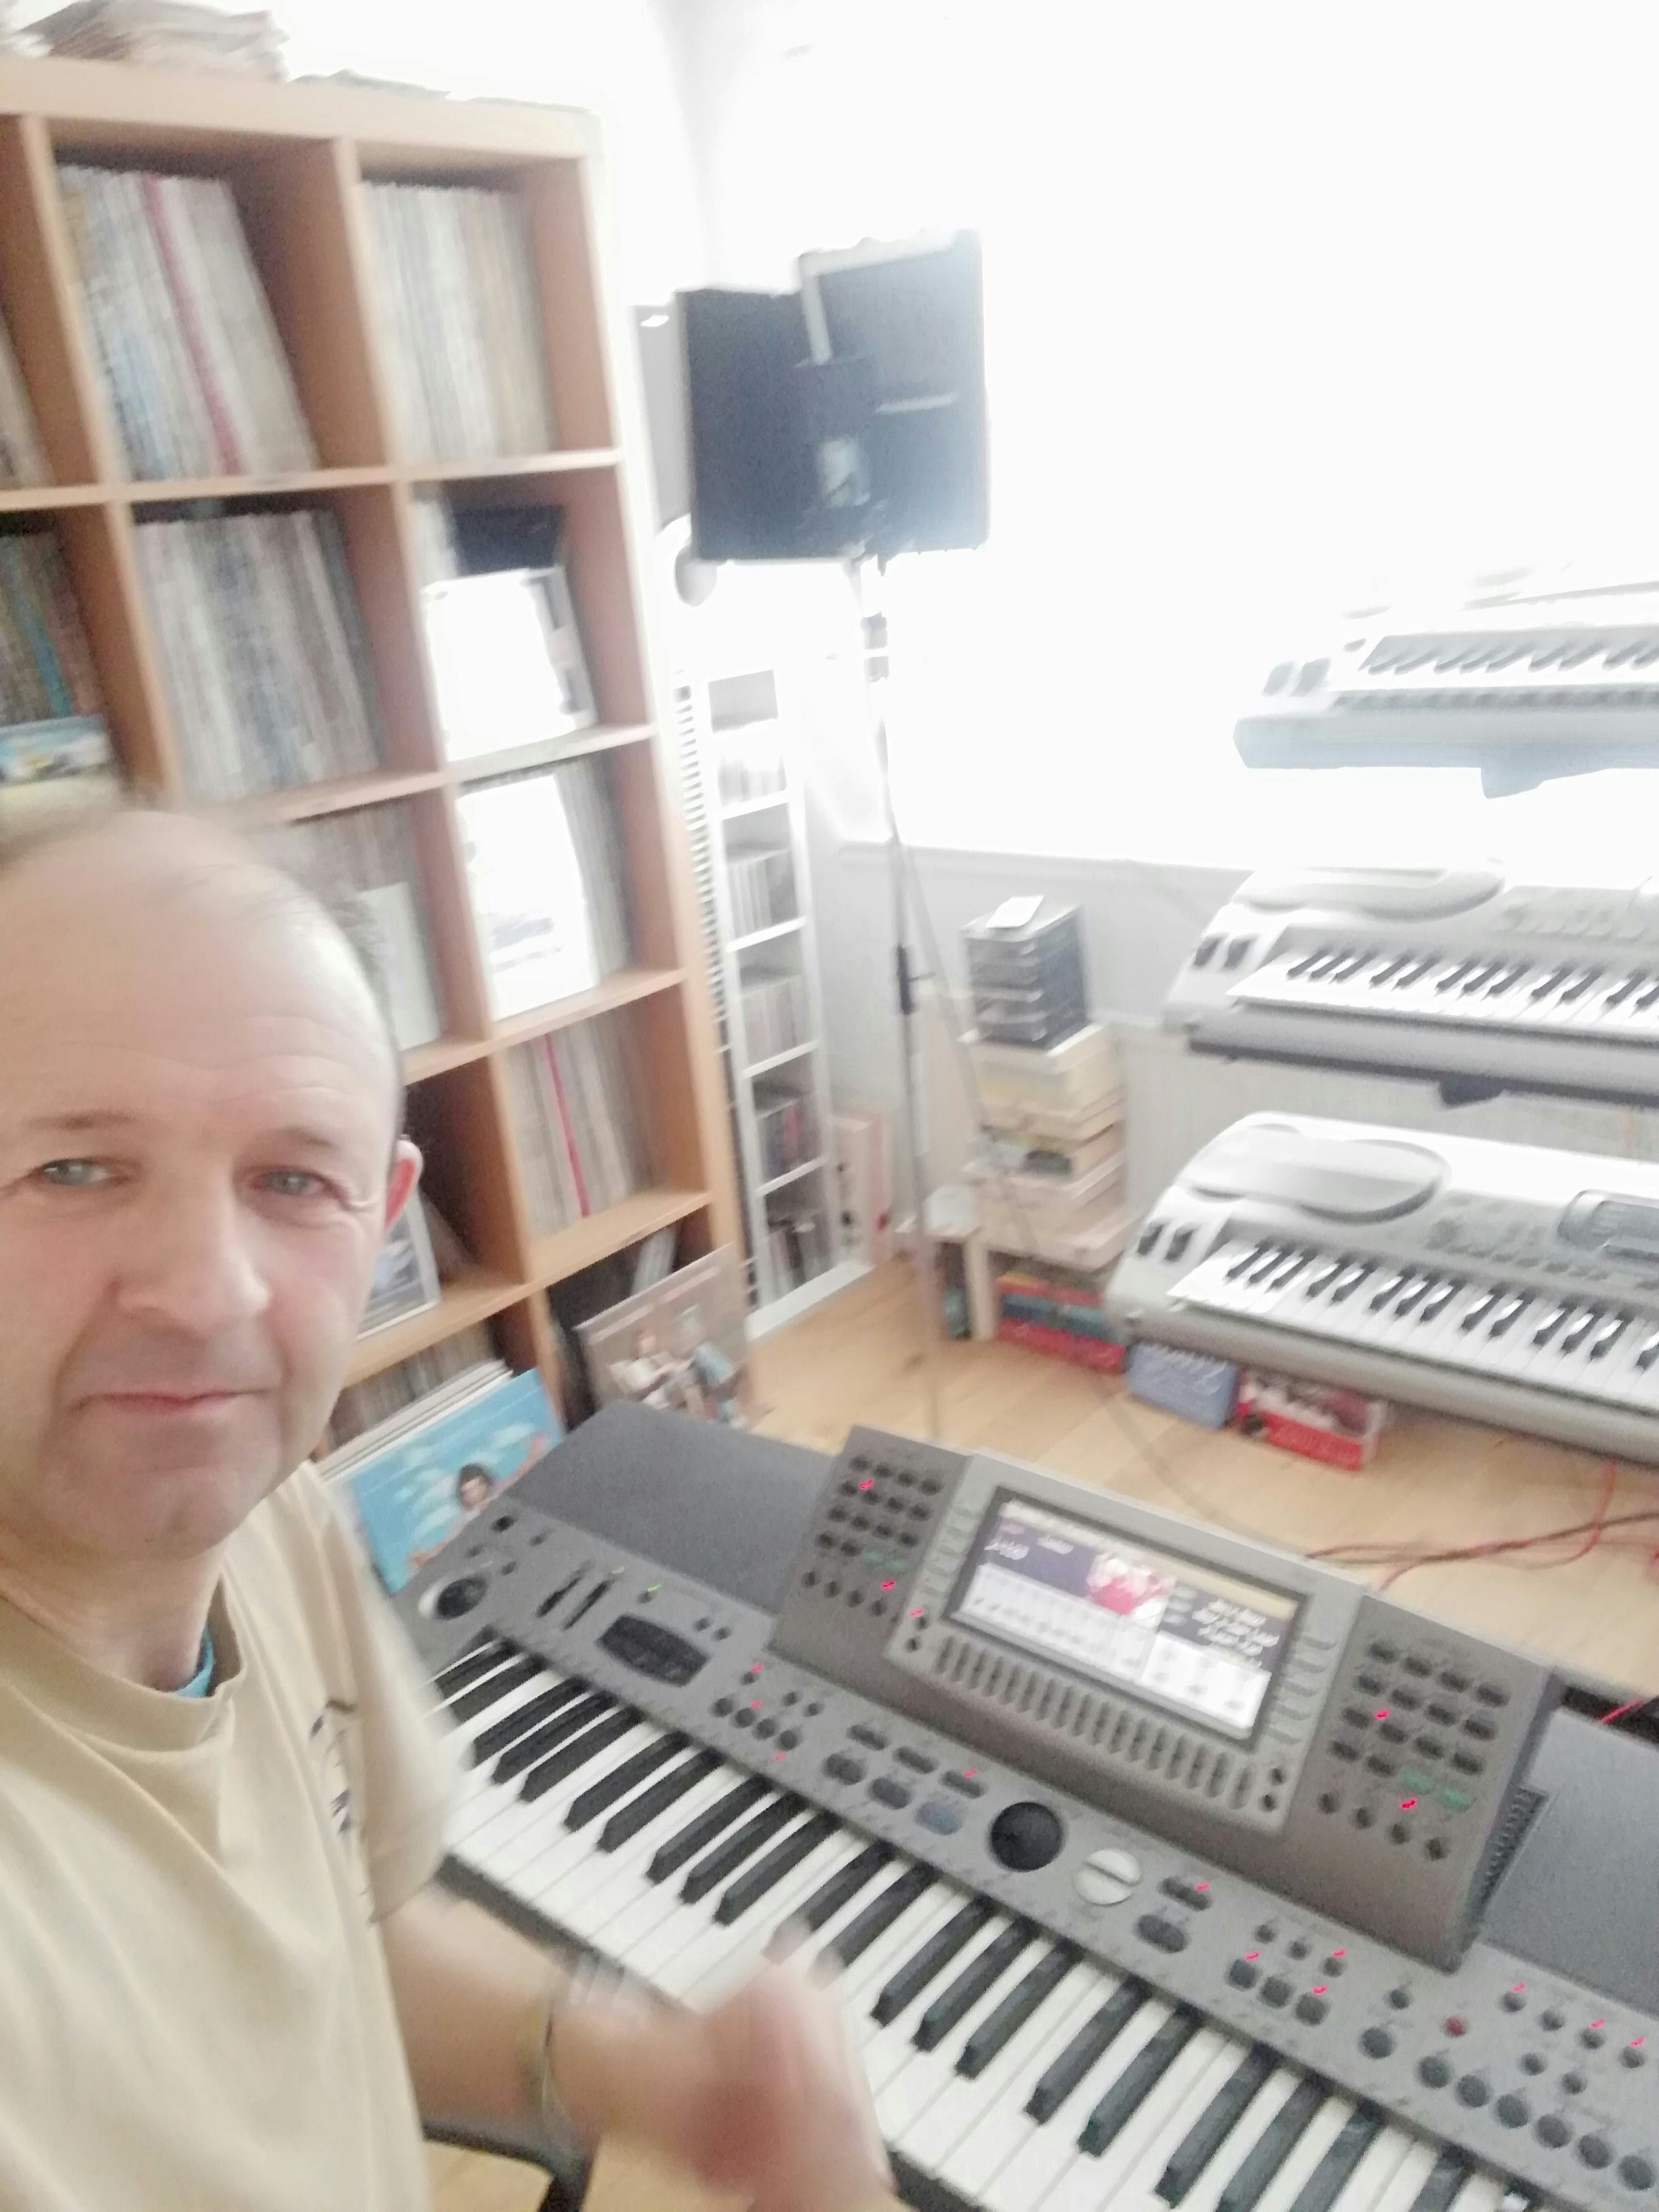 SAT NIGHT in the home studio playing my 4 keyboards live enjoy :)